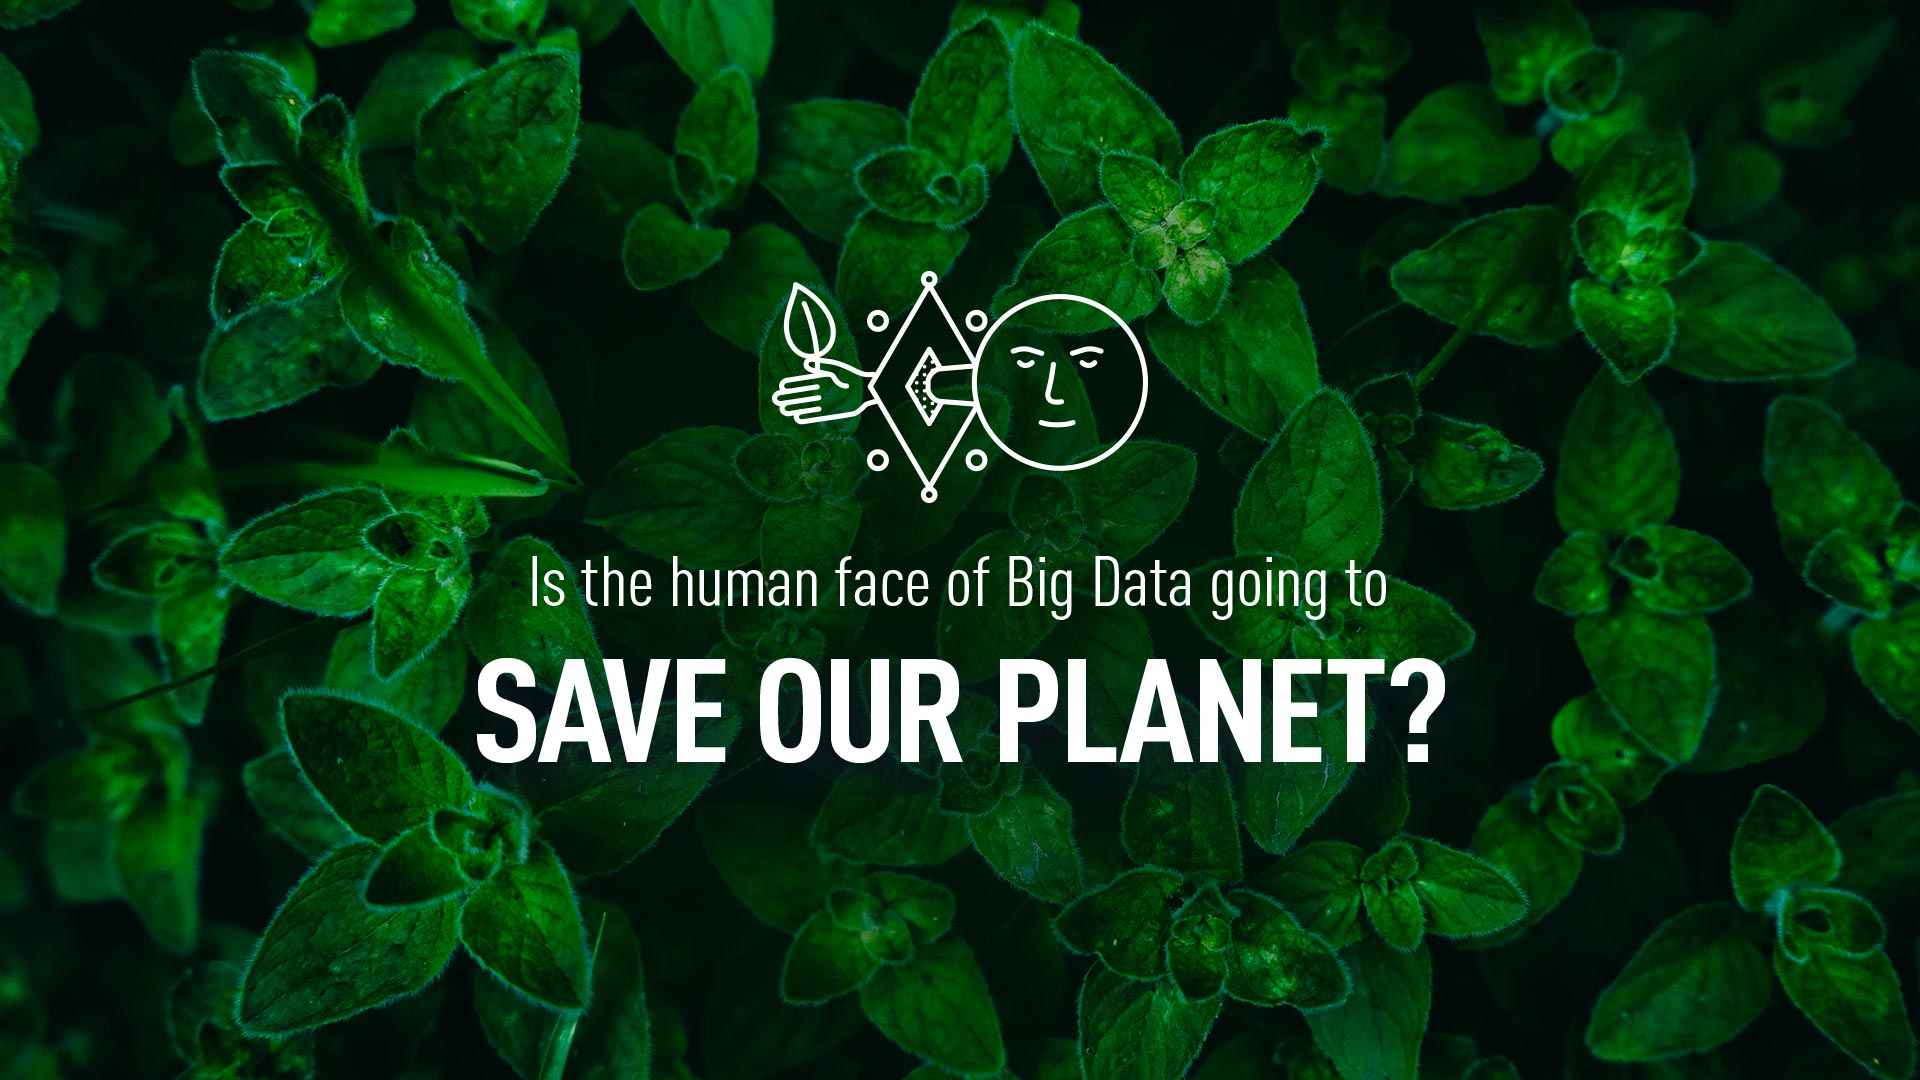 Is the human face of Big Data going to save our planet?